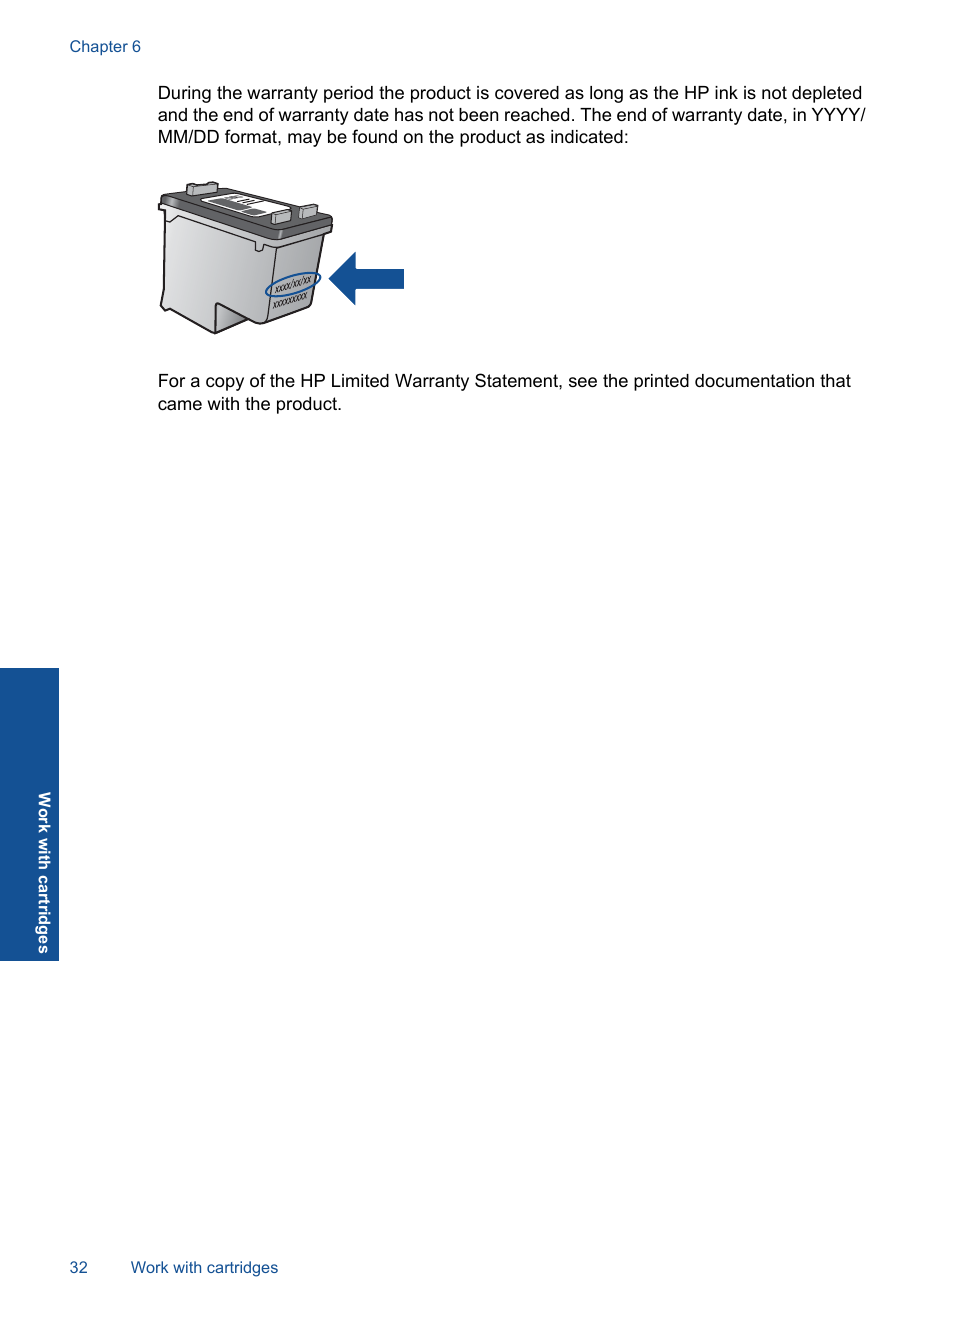 HP Deskjet 1056 All-in-One Printer - J410a User Manual | Page 34 / 54